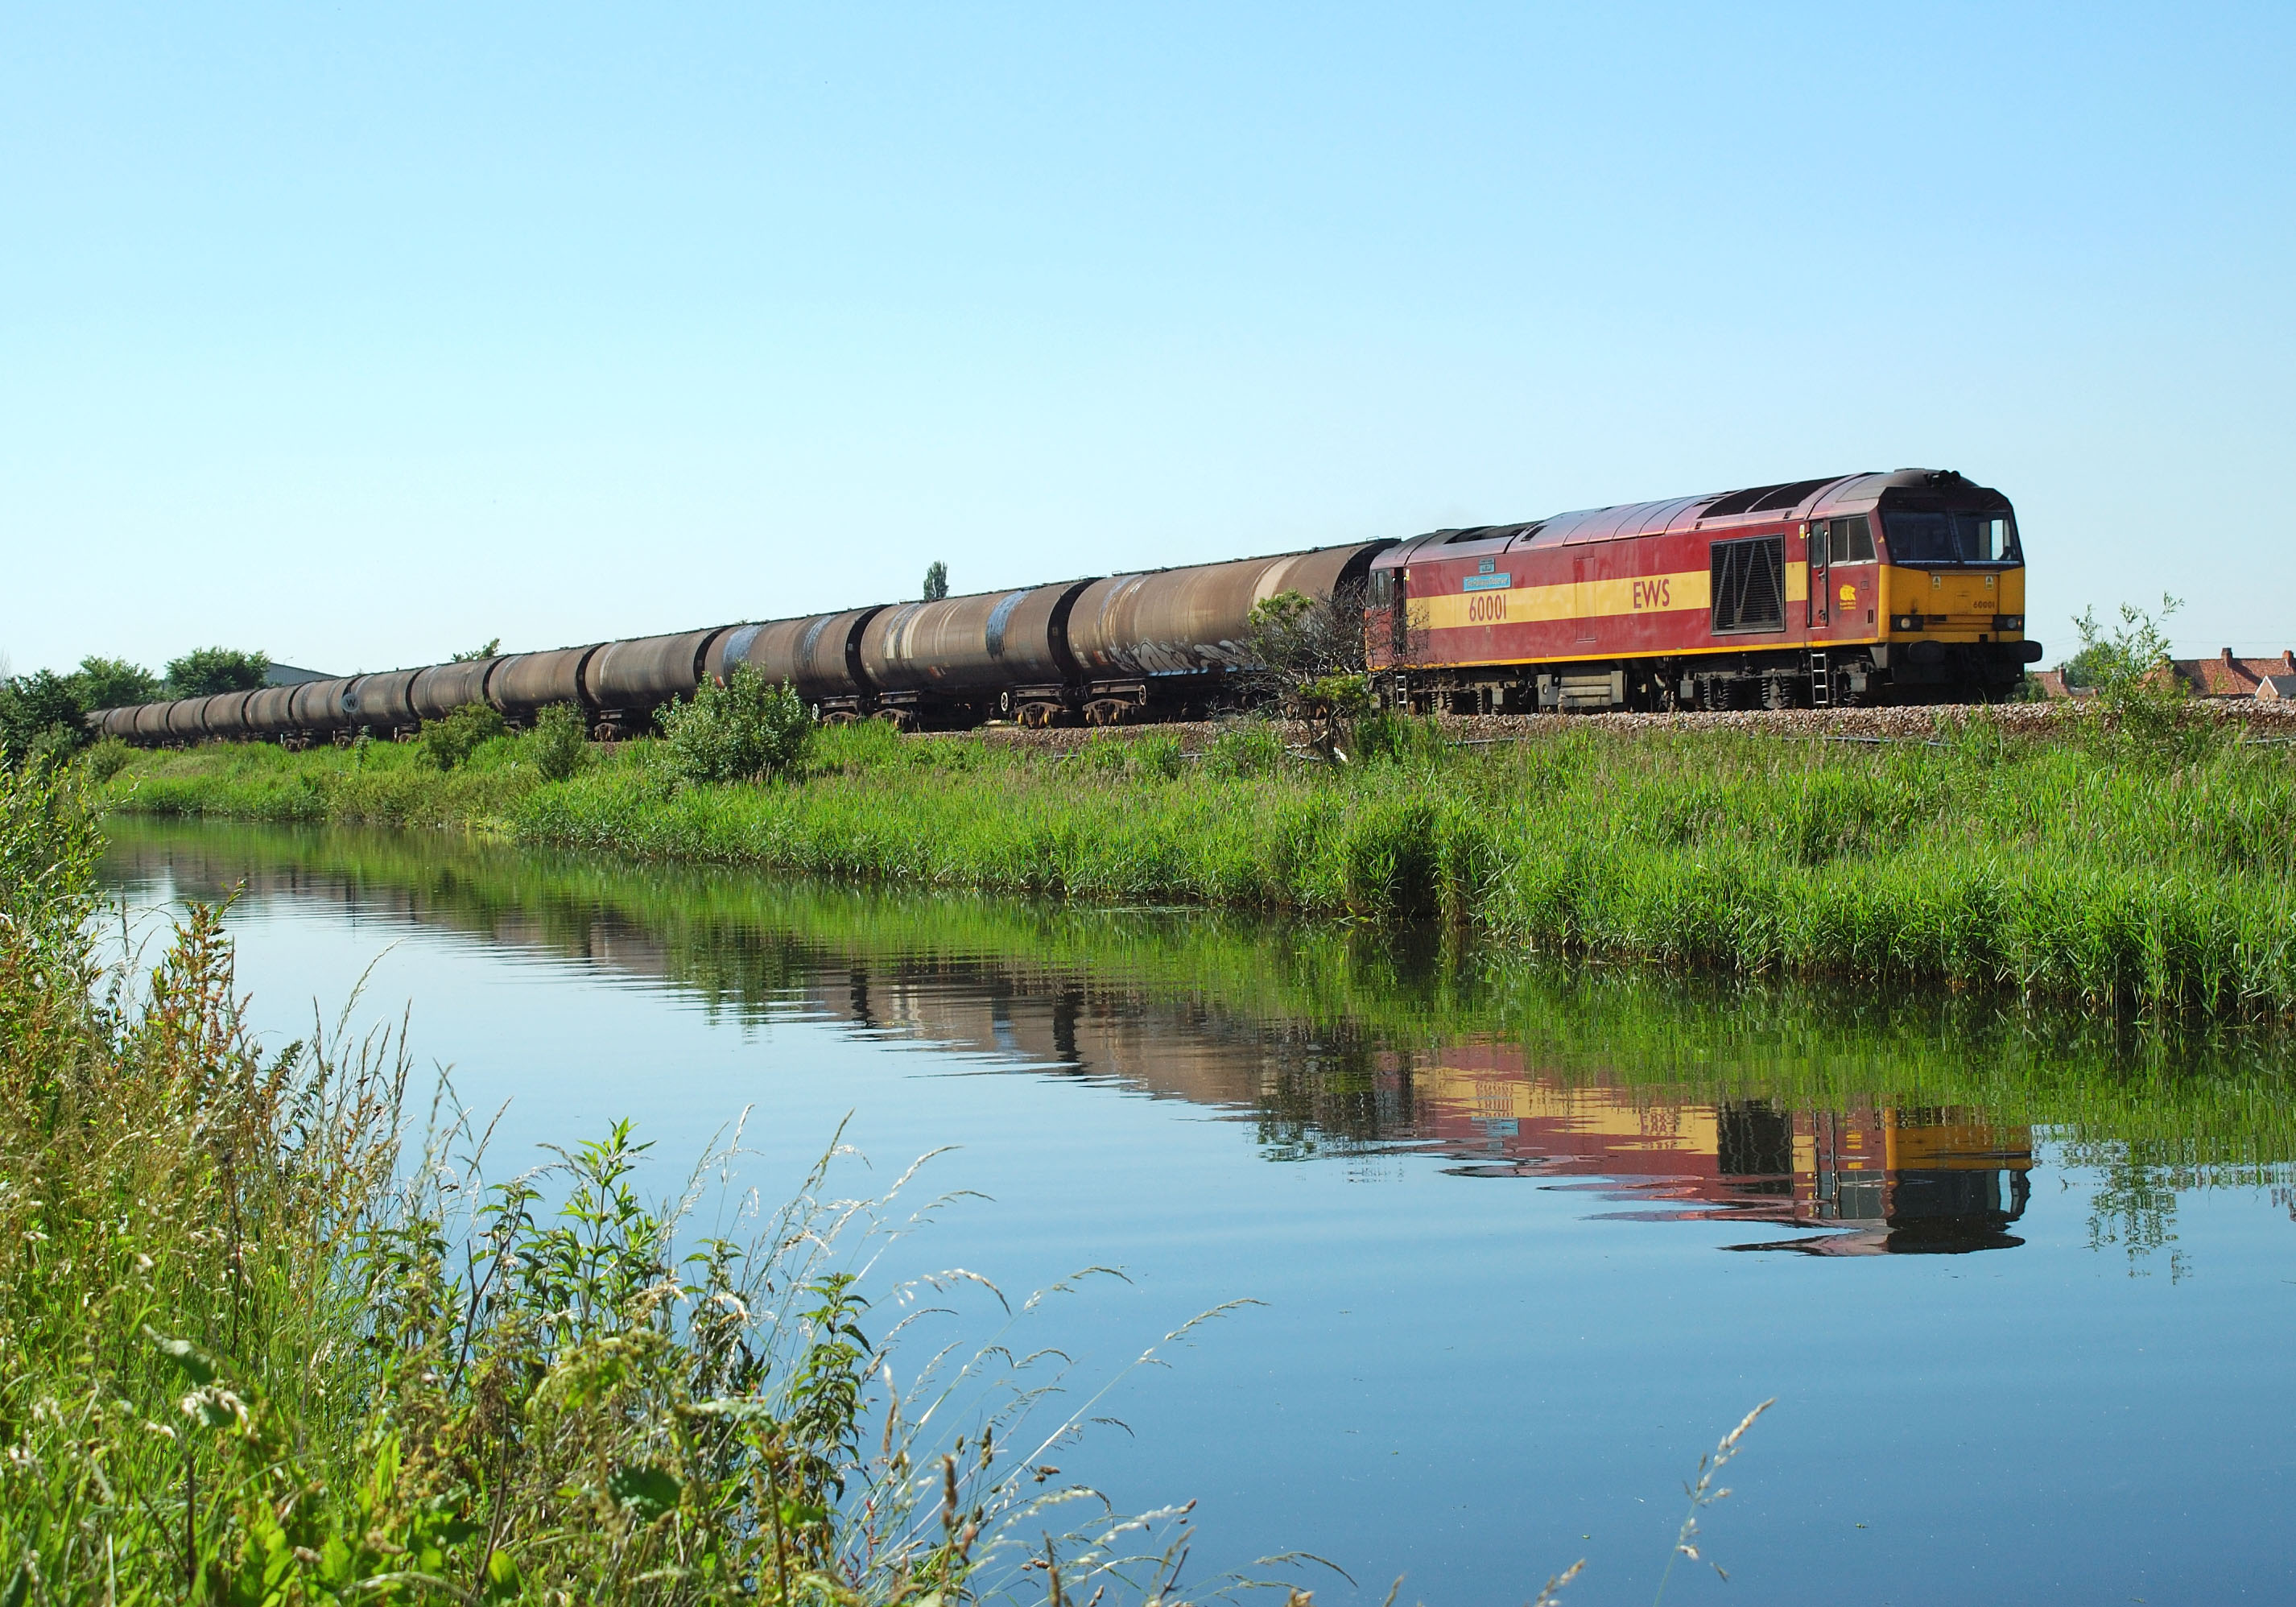 And a few hours later 60001 runs alongside the Stainforth & Keadby canal at Crowle with 6E32 Preston Docks to Lindsey empty bitumen tanks, 27th June 2005. Julie Knowles